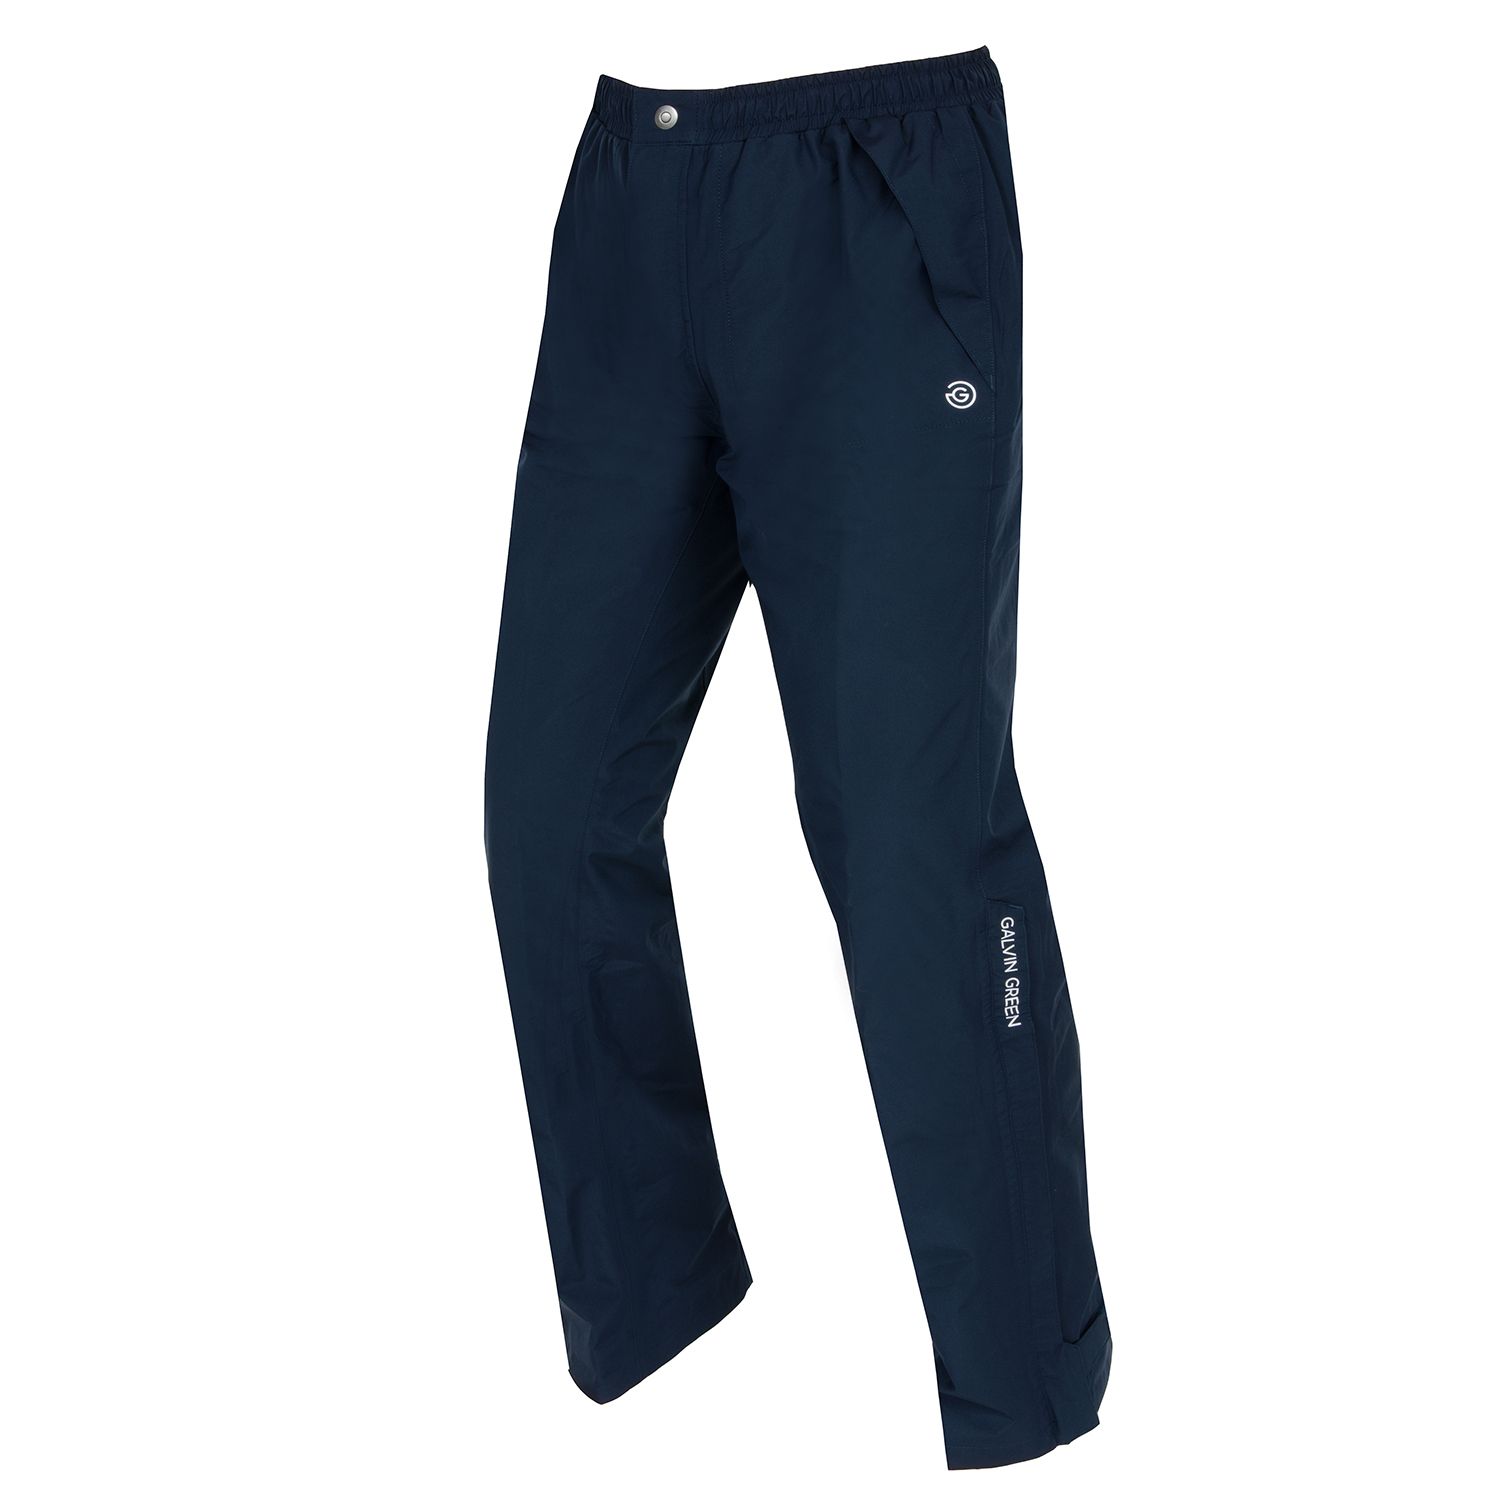 Galvin Green Andy Gore-Tex Waterproof Golf Trousers